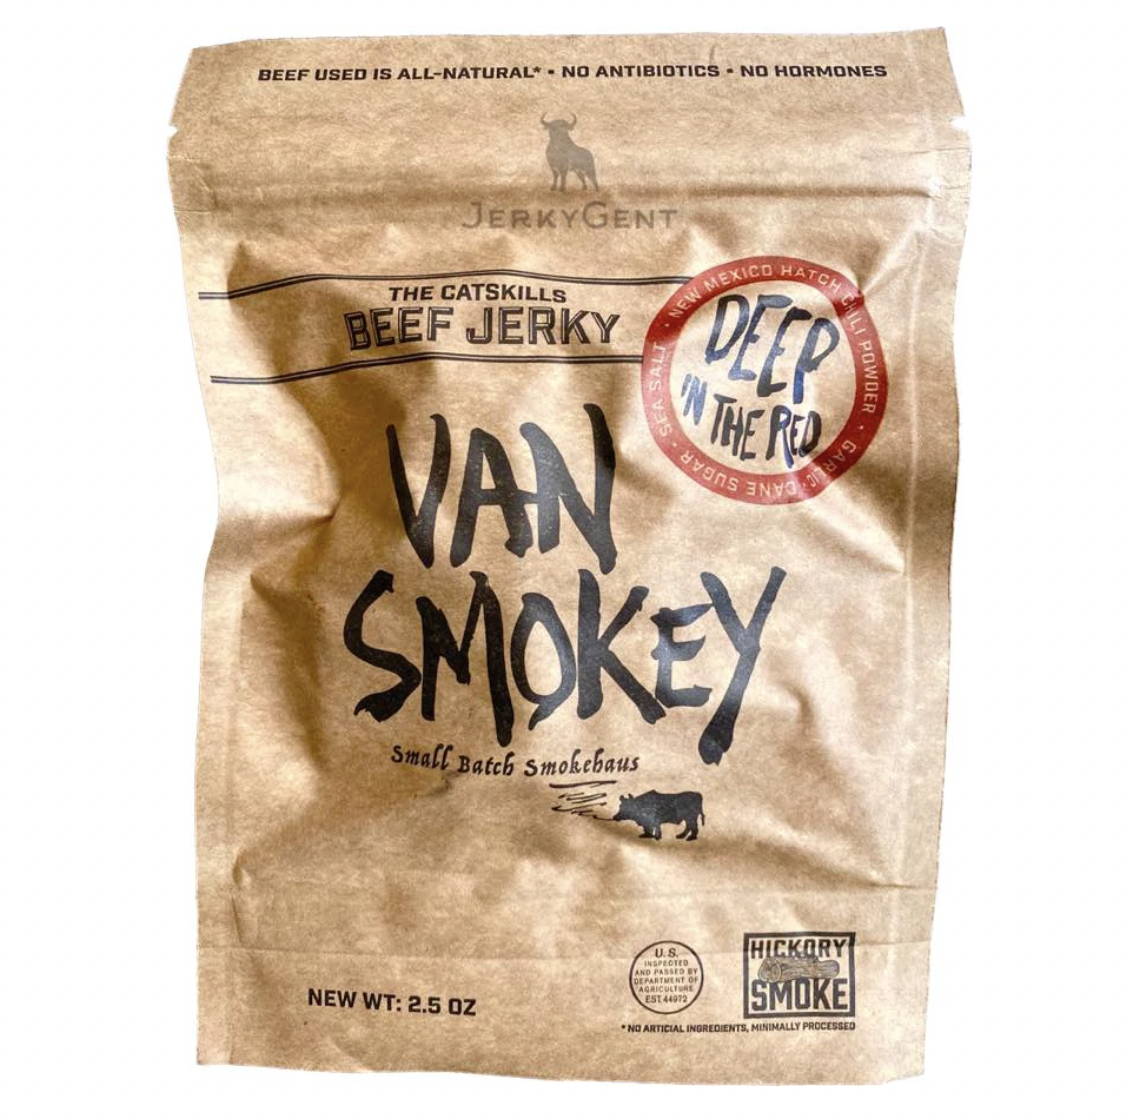 Van Smokey Deep IN The Red Hatch Chile Smoked Jerky